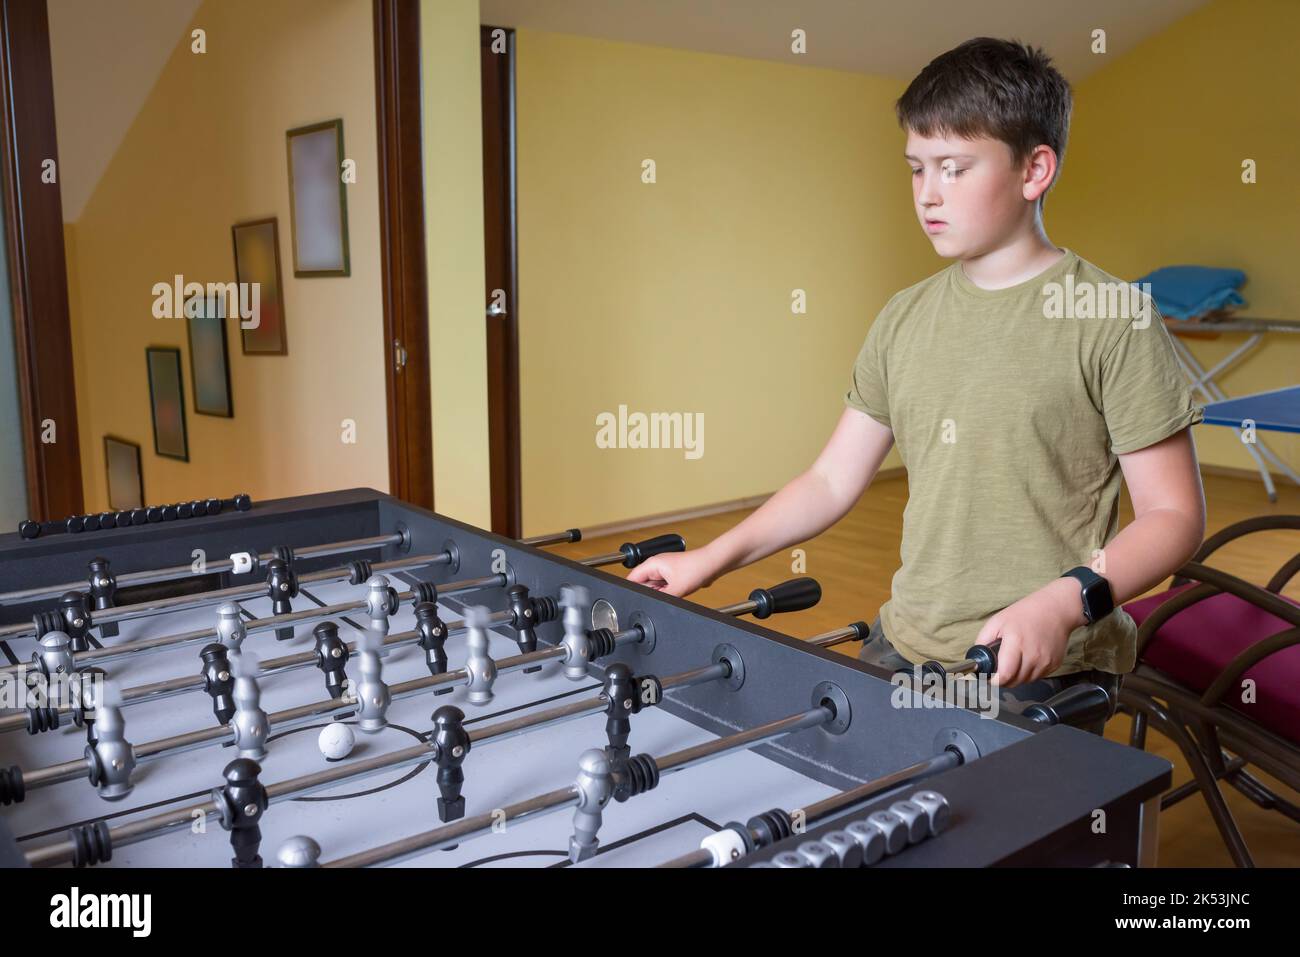 A boy plays table football. Sports concept Stock Photo